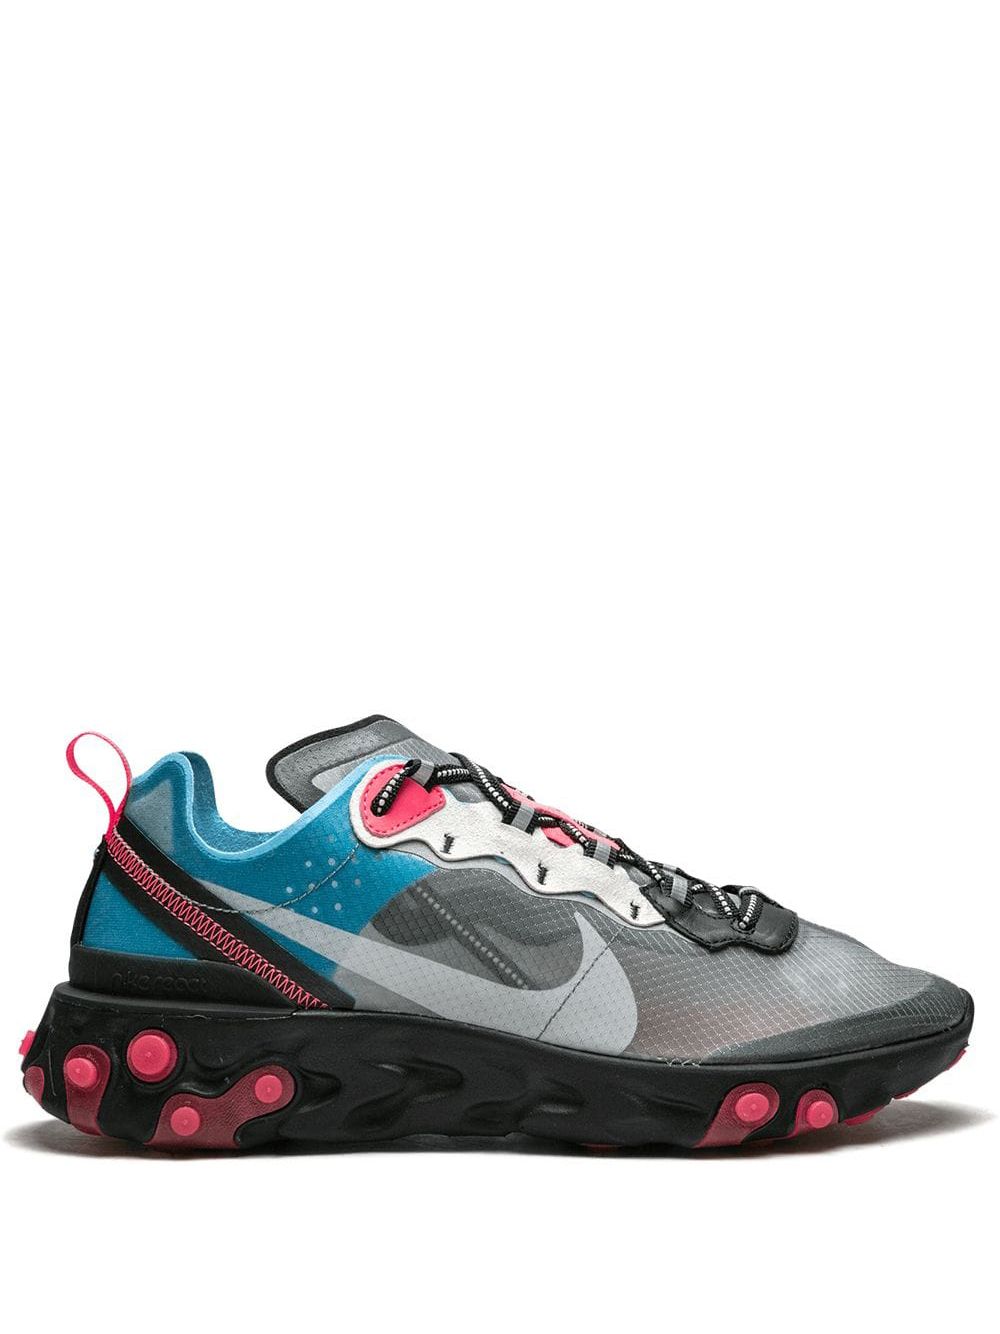 Nike React Element 87 "Blue Chill" sneakers - Grey von Nike